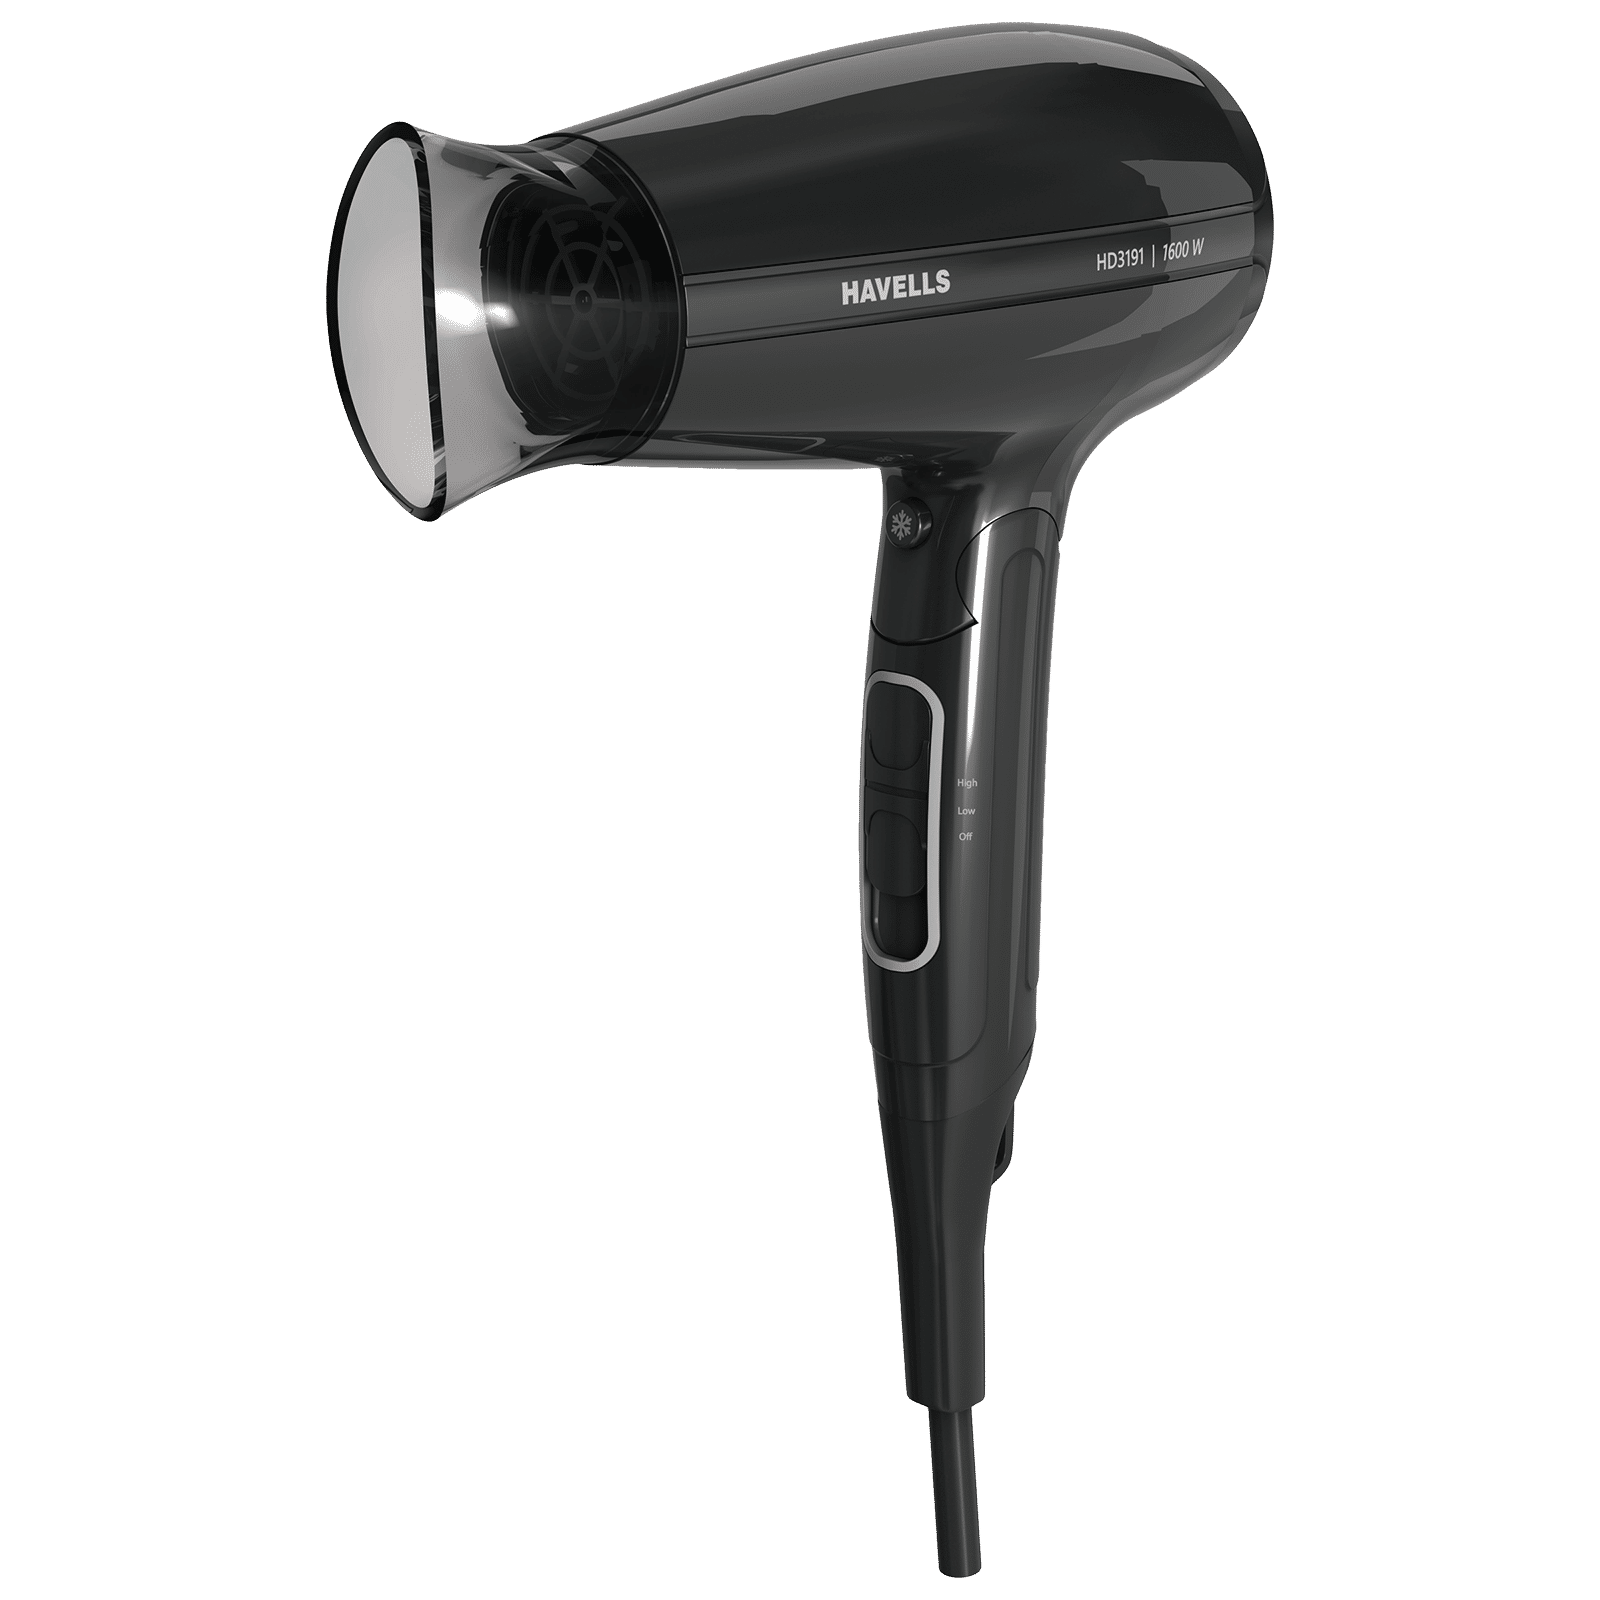 Buy HAVELLS HD3191 Hair Dryer with 3 Heat Settings & Cool Shot (Heat Balance Technology, Black) Online - Croma